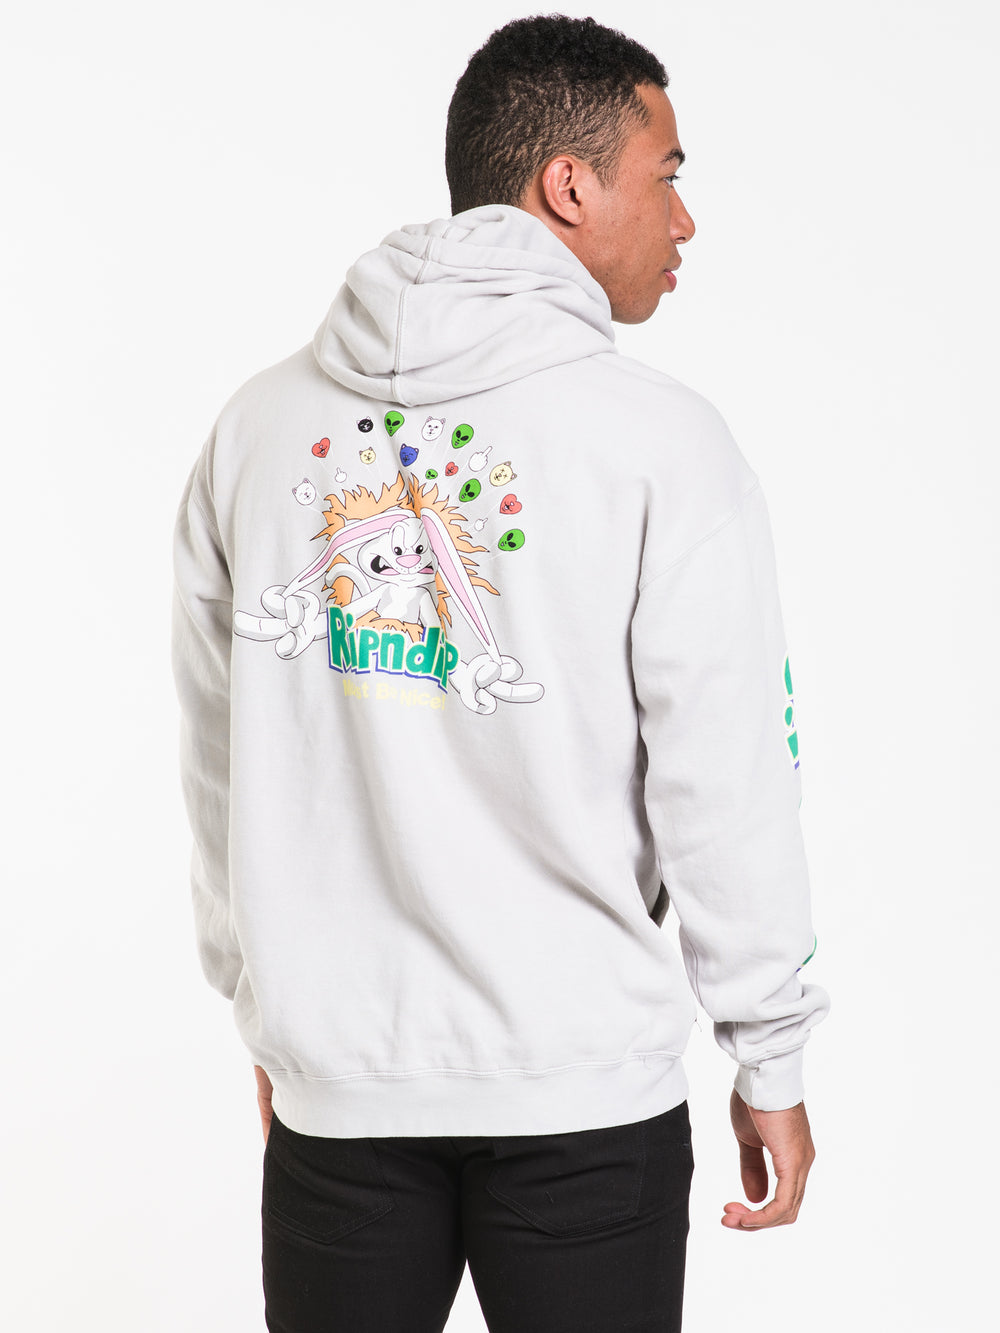 PULL-OVER À CAPUCHE RIP N DIP SILLY NERM - DÉSTOCKAGE